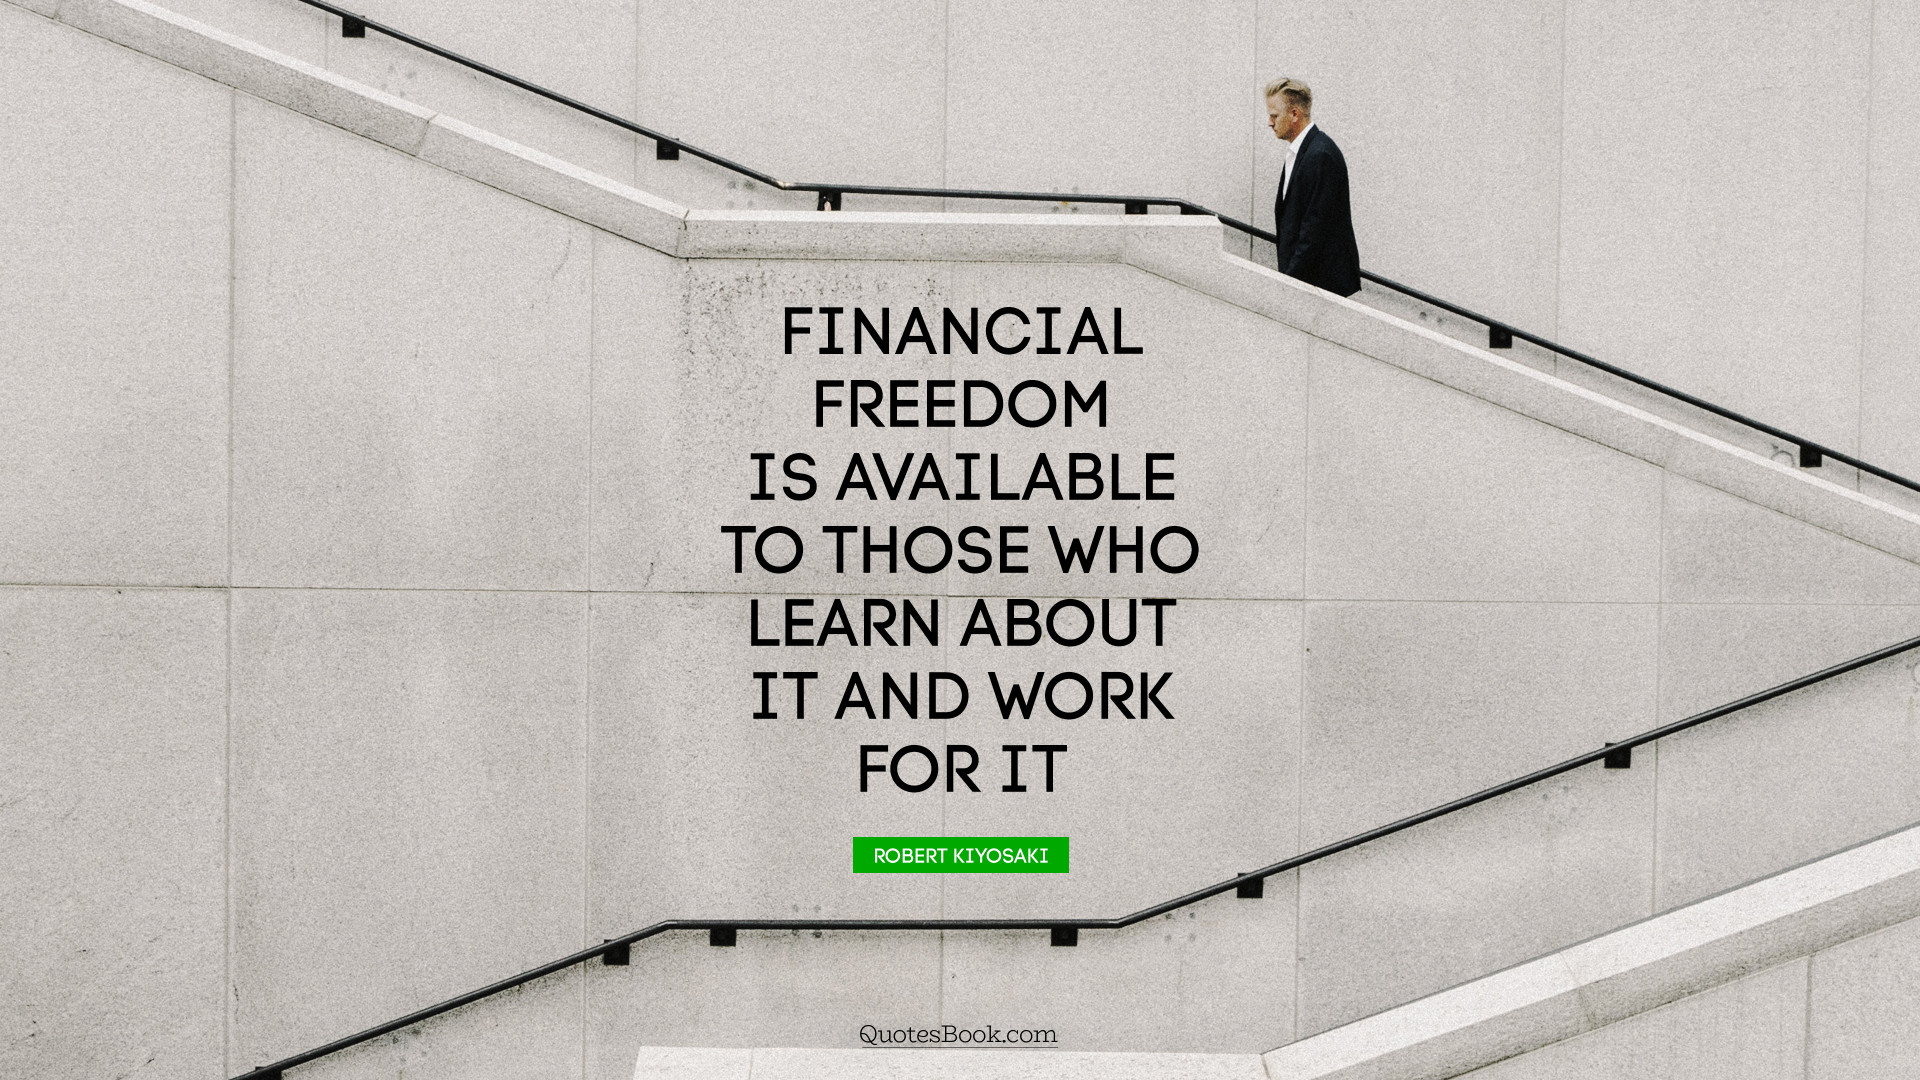 Financial freedom is available to those who learn about it